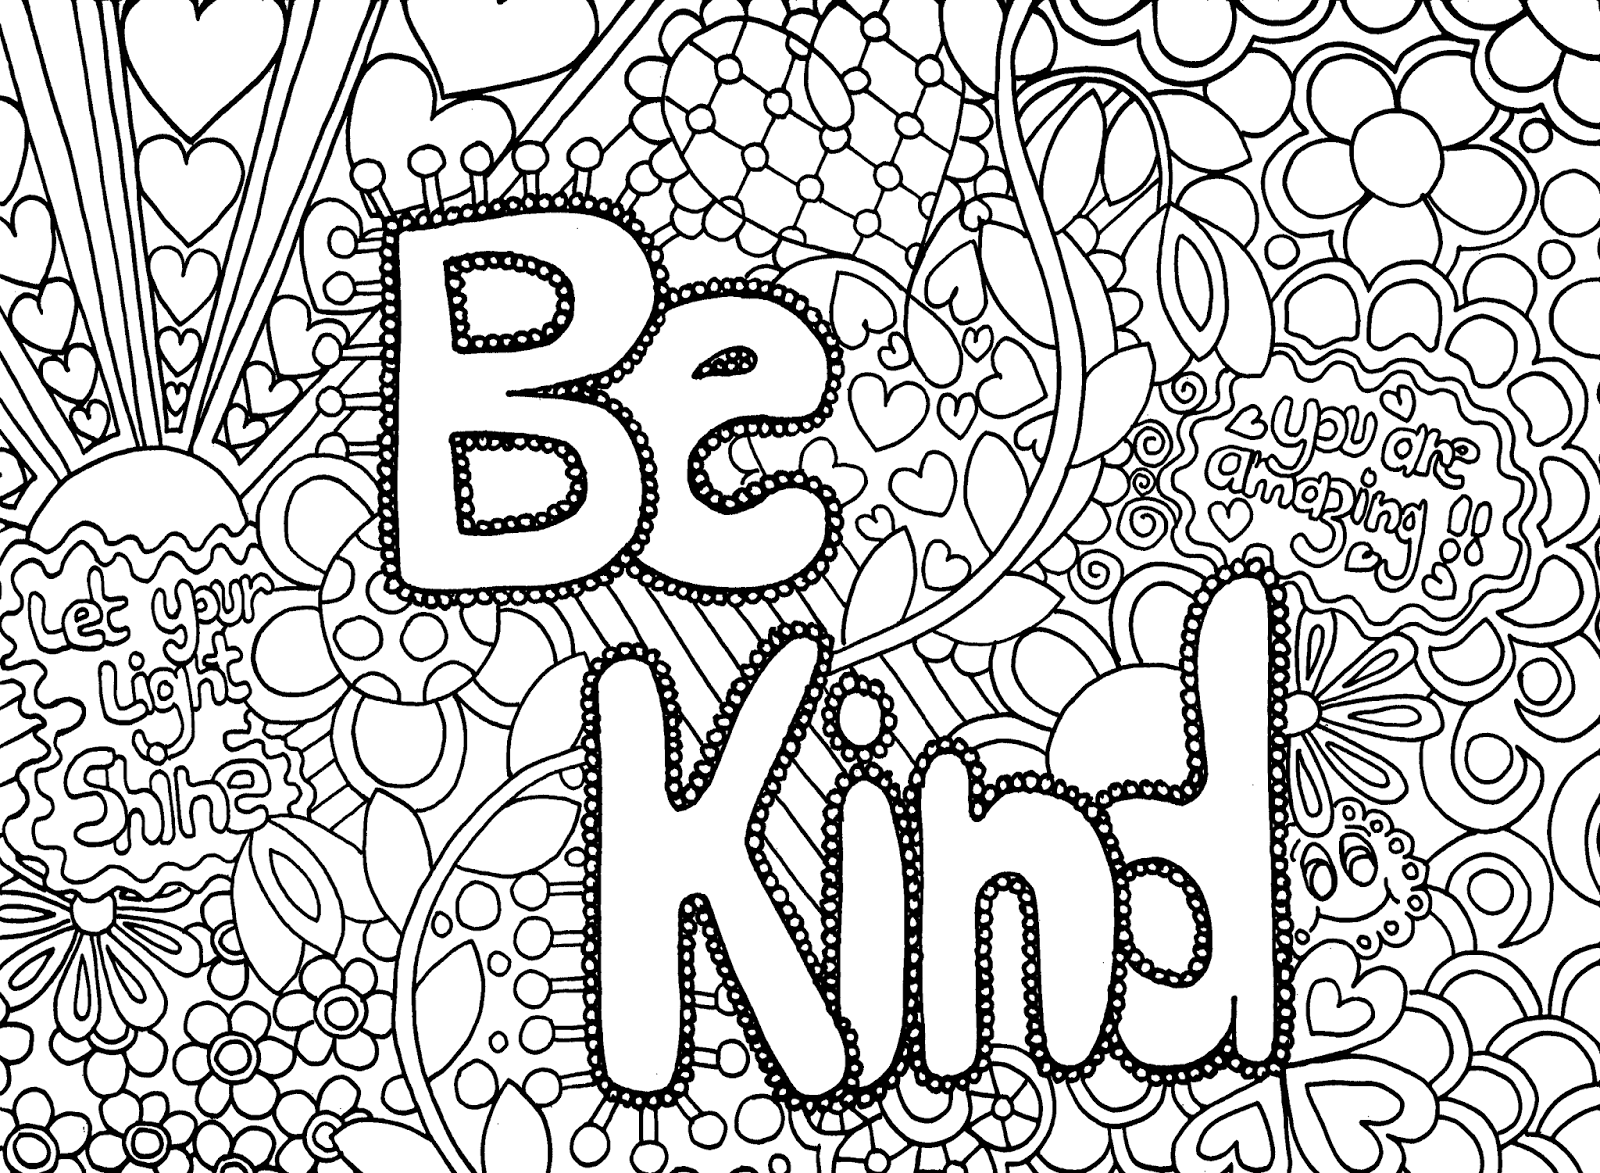 Download Hard Coloring Pages for Adults - Best Coloring Pages For Kids